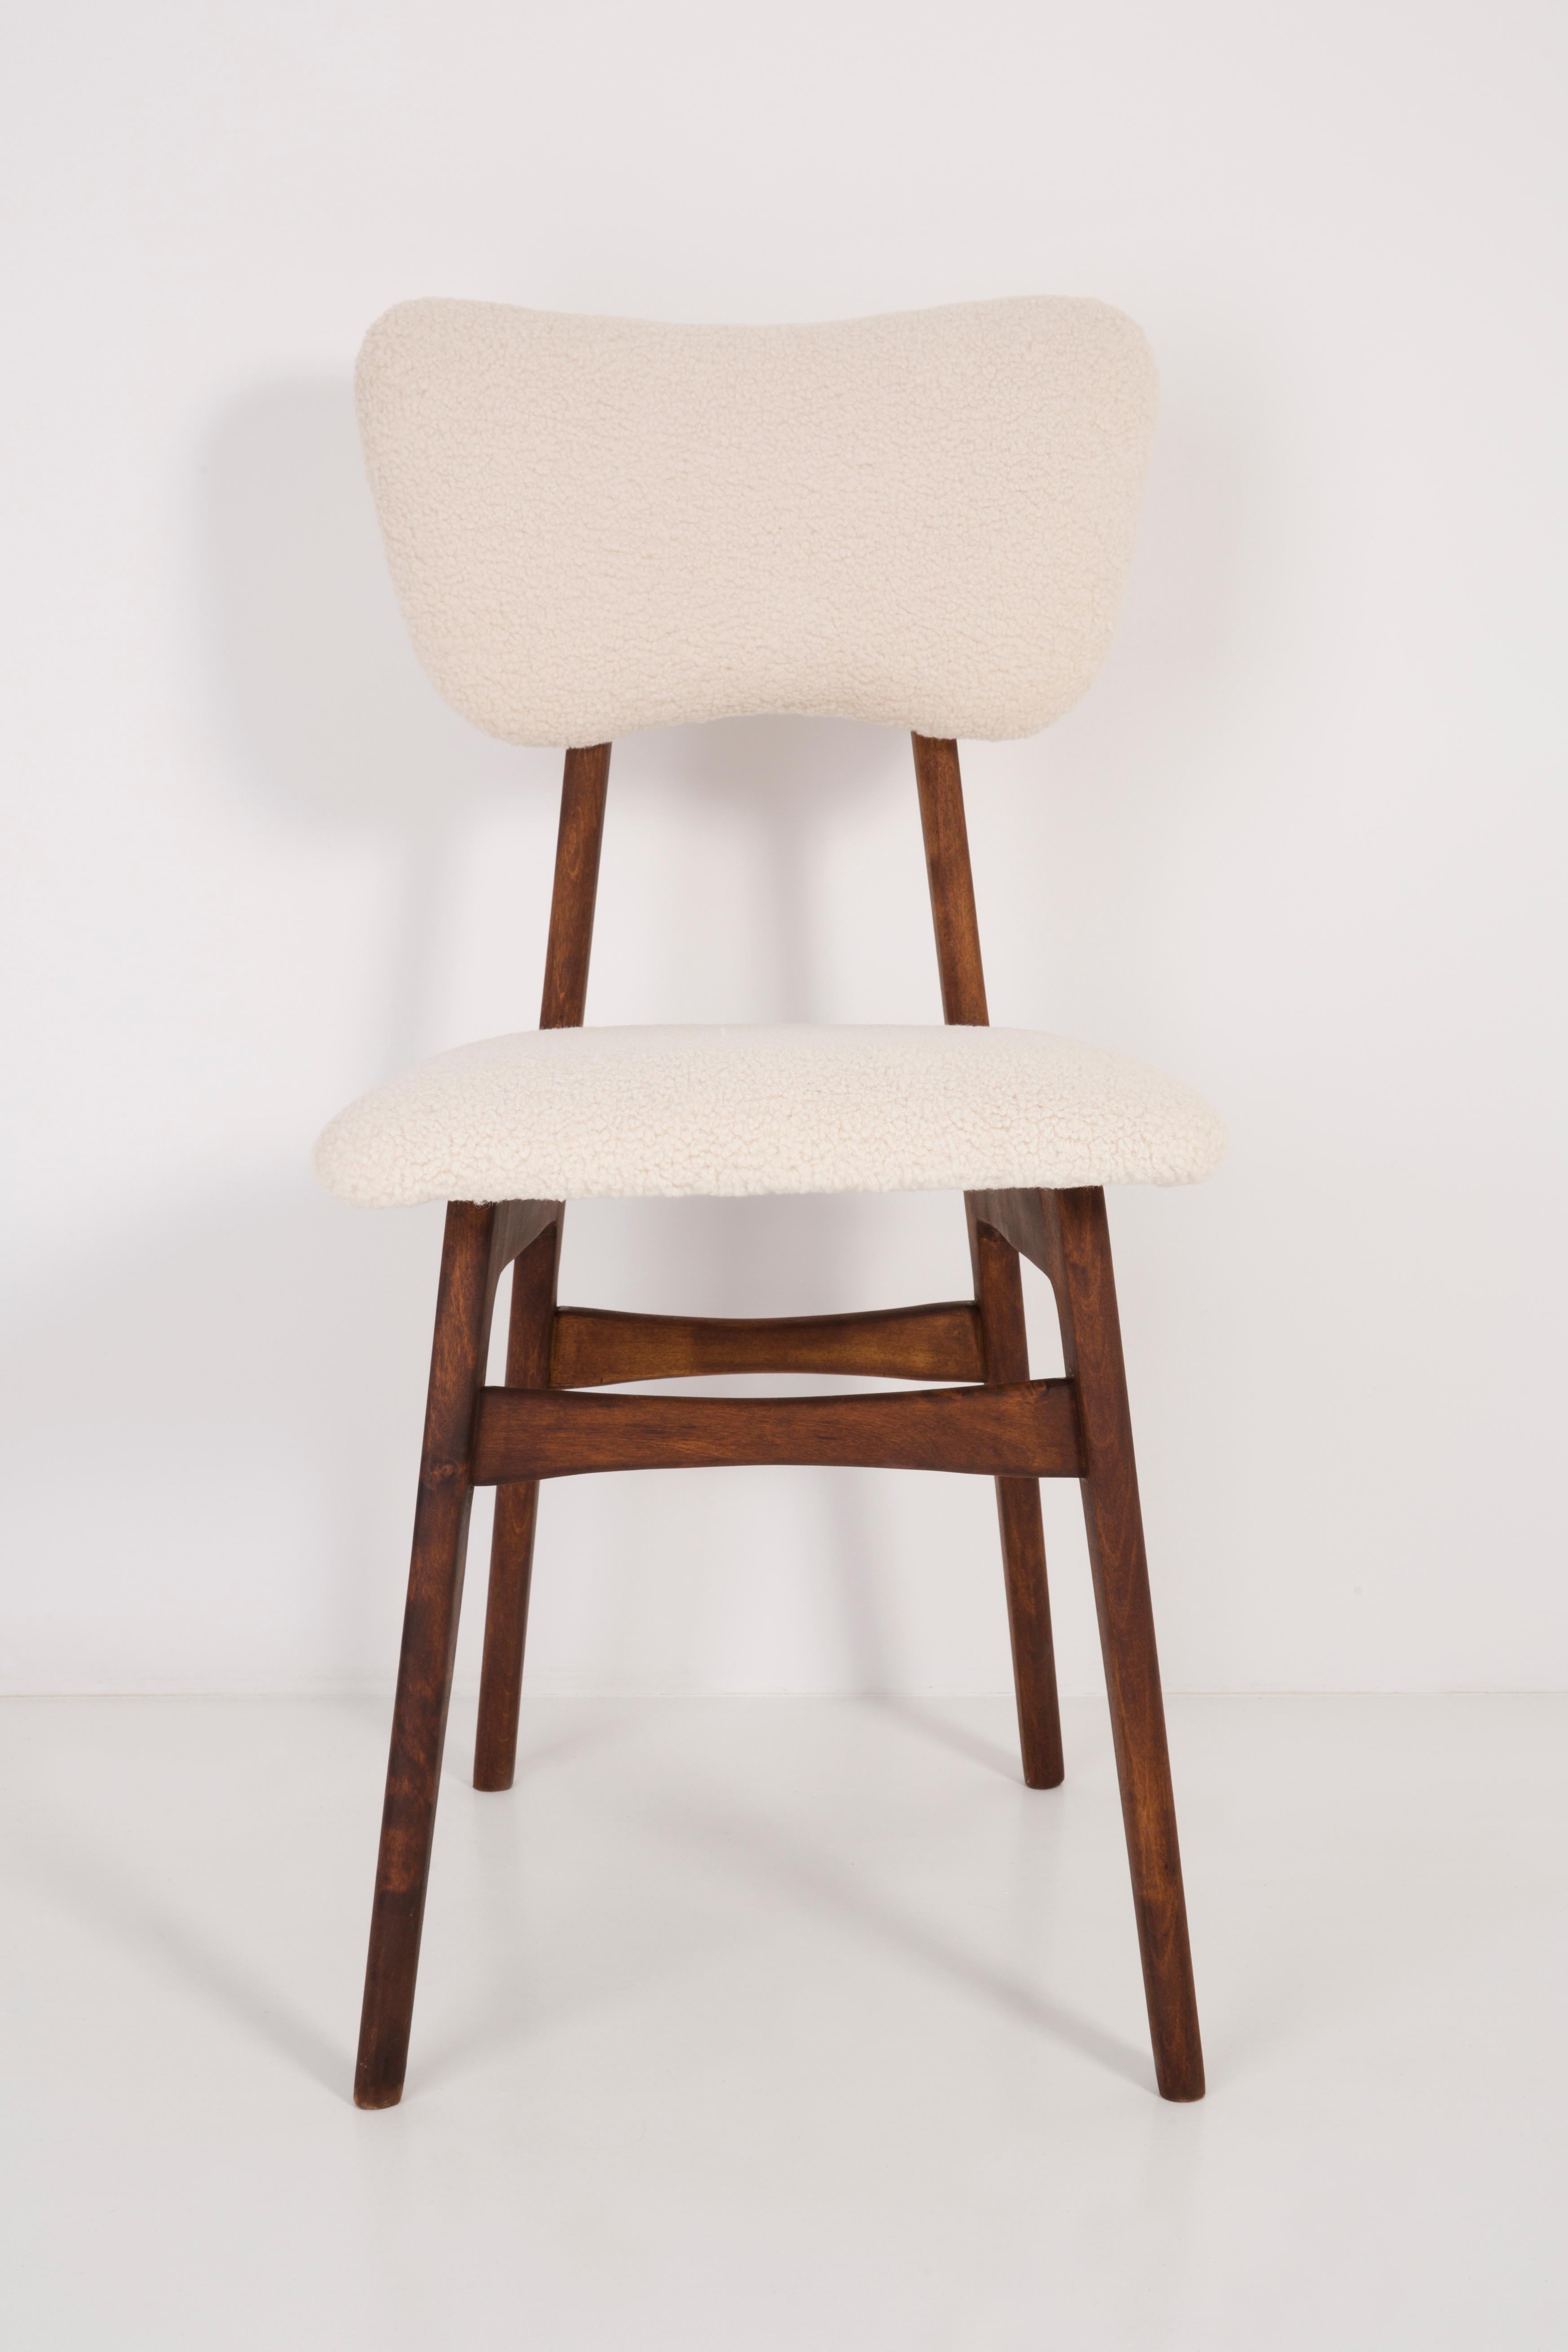 Set of Four 20th Century Light Crème Boucle Chairs, 1960s For Sale 3